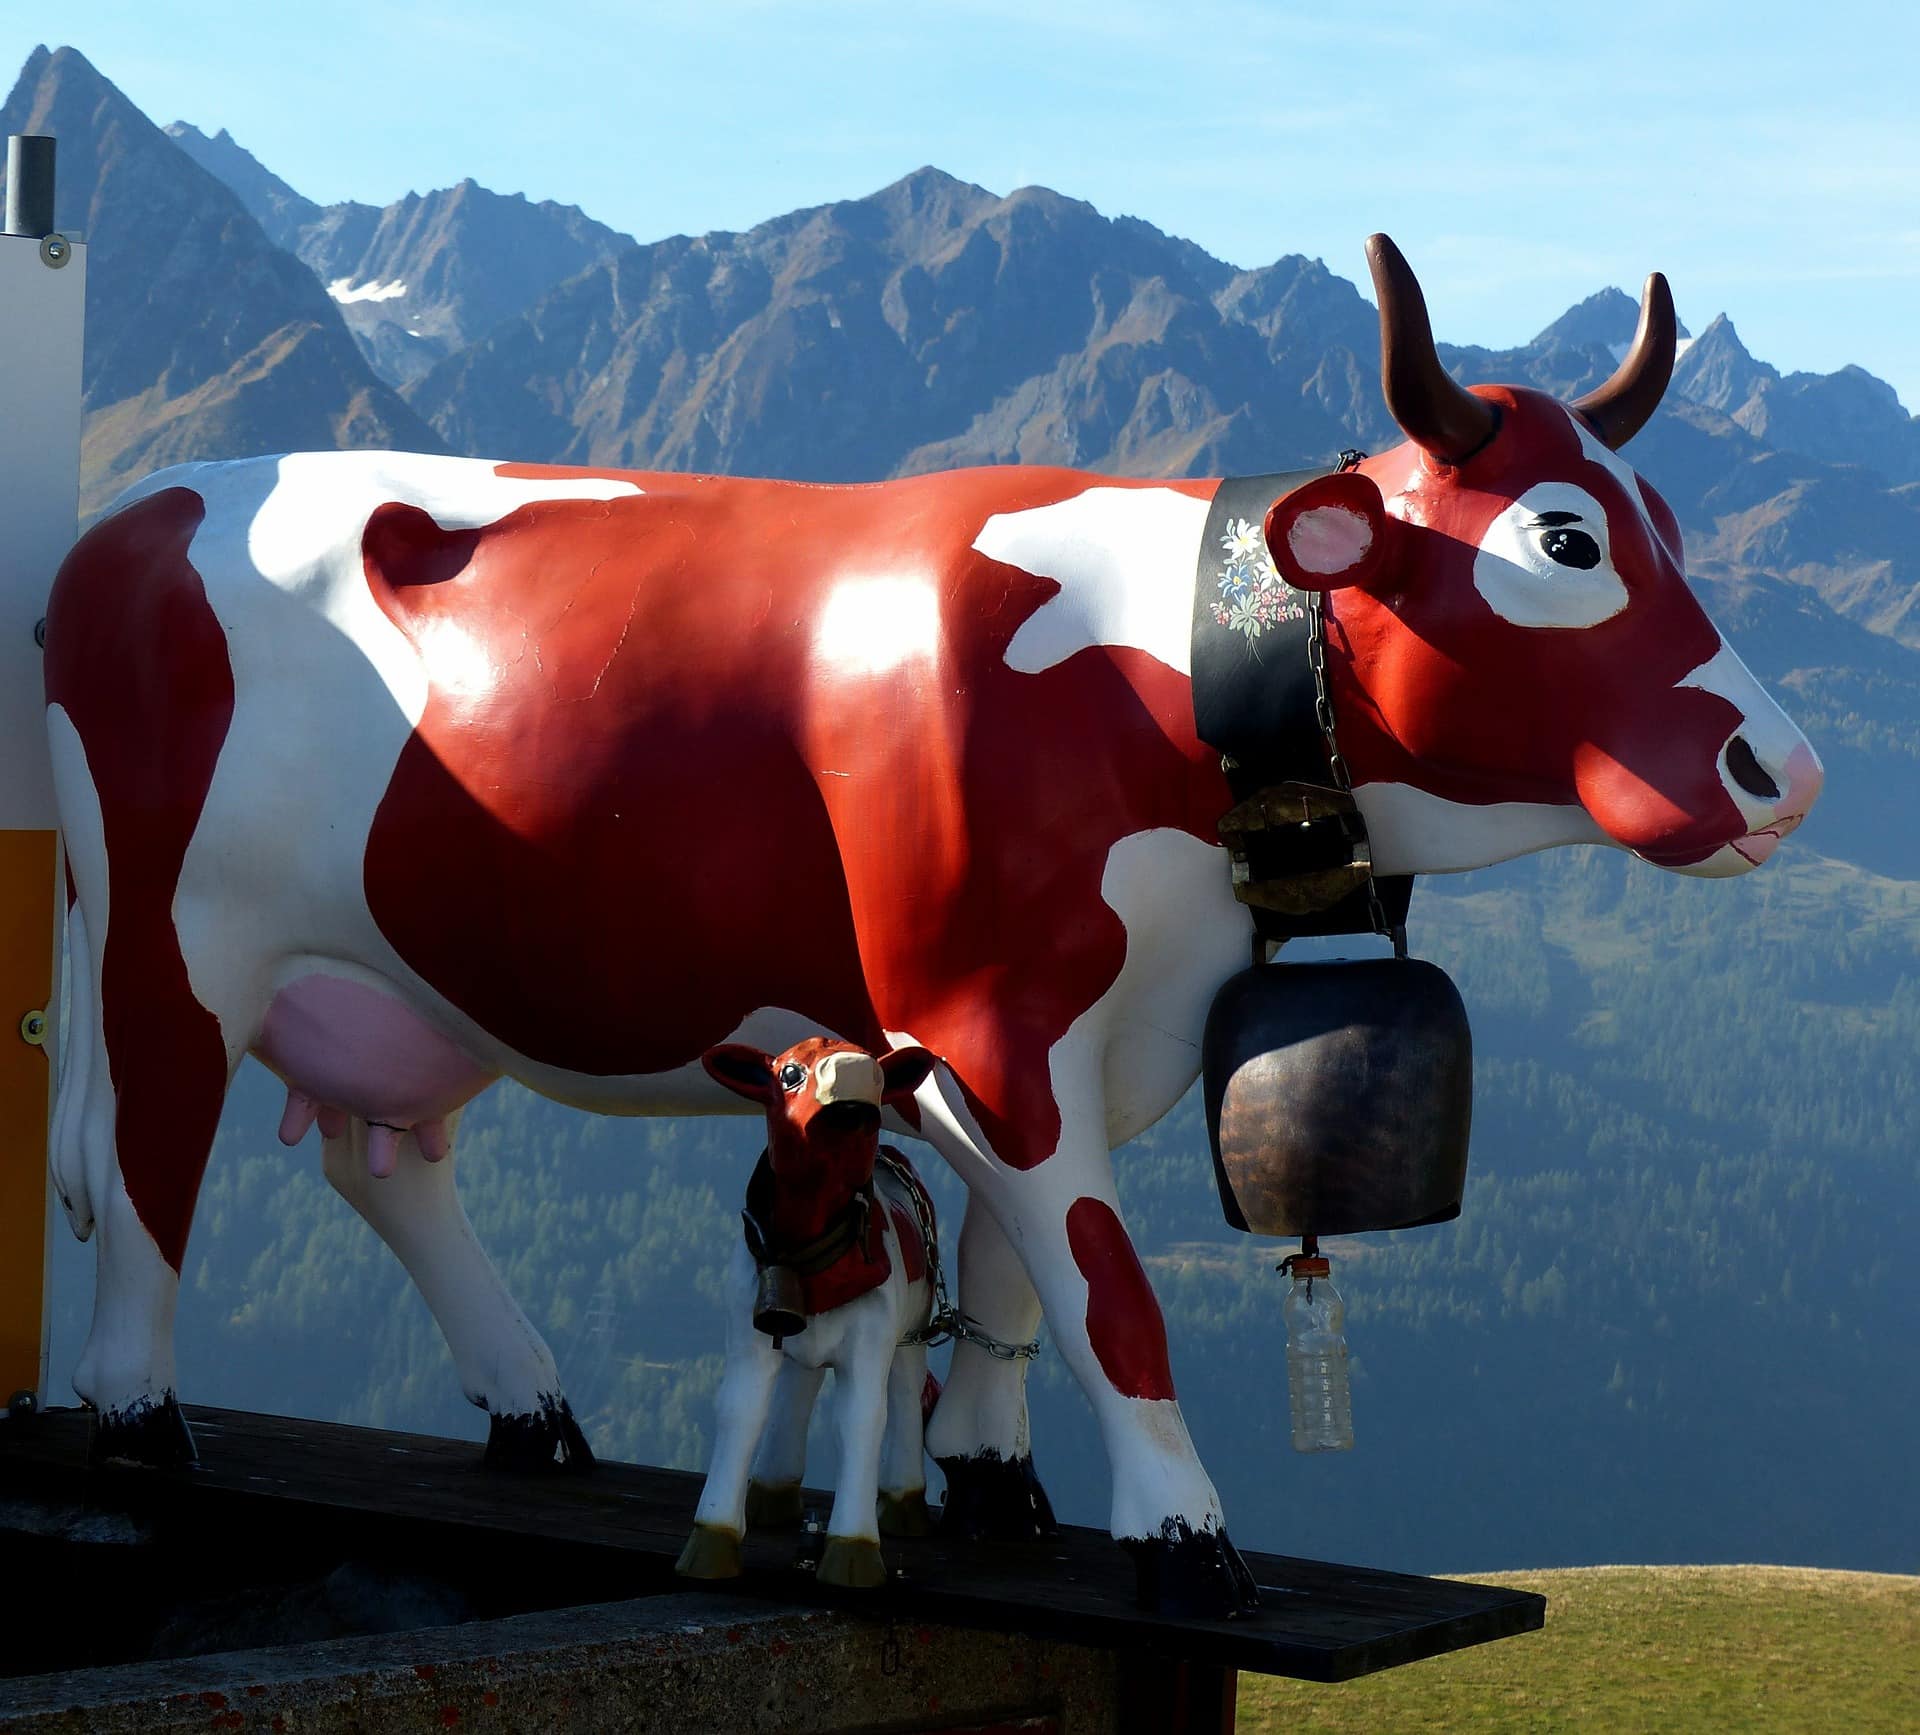 Cows are an unofficial emblem of Switzerland | CC0